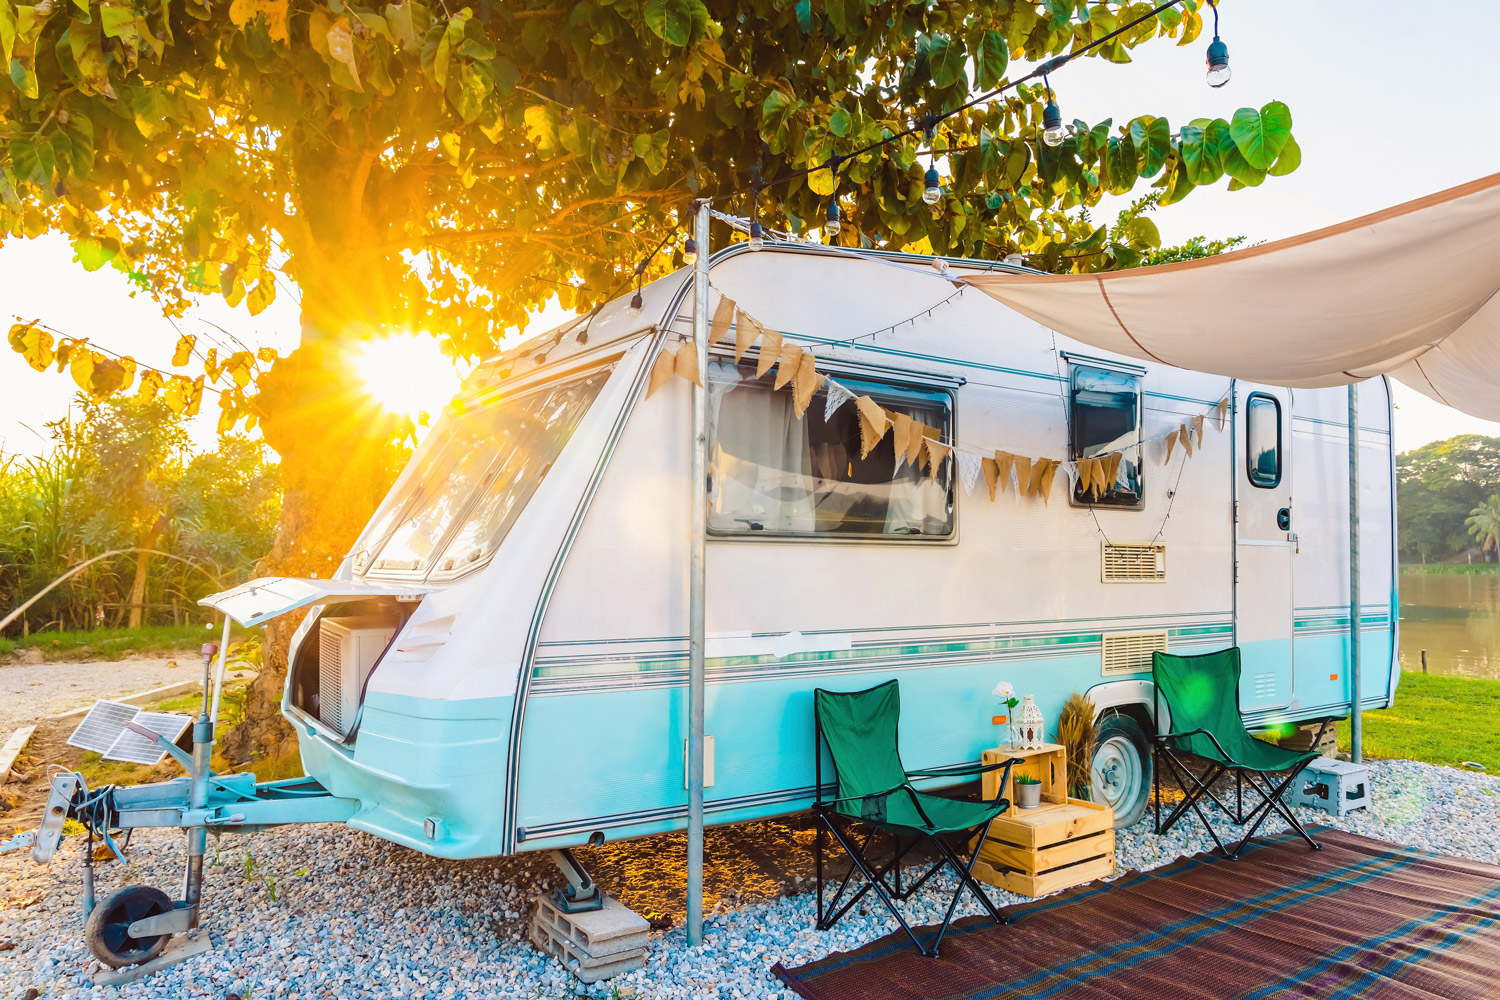 A used RV for sale by owner set up with patio and awning at sunset